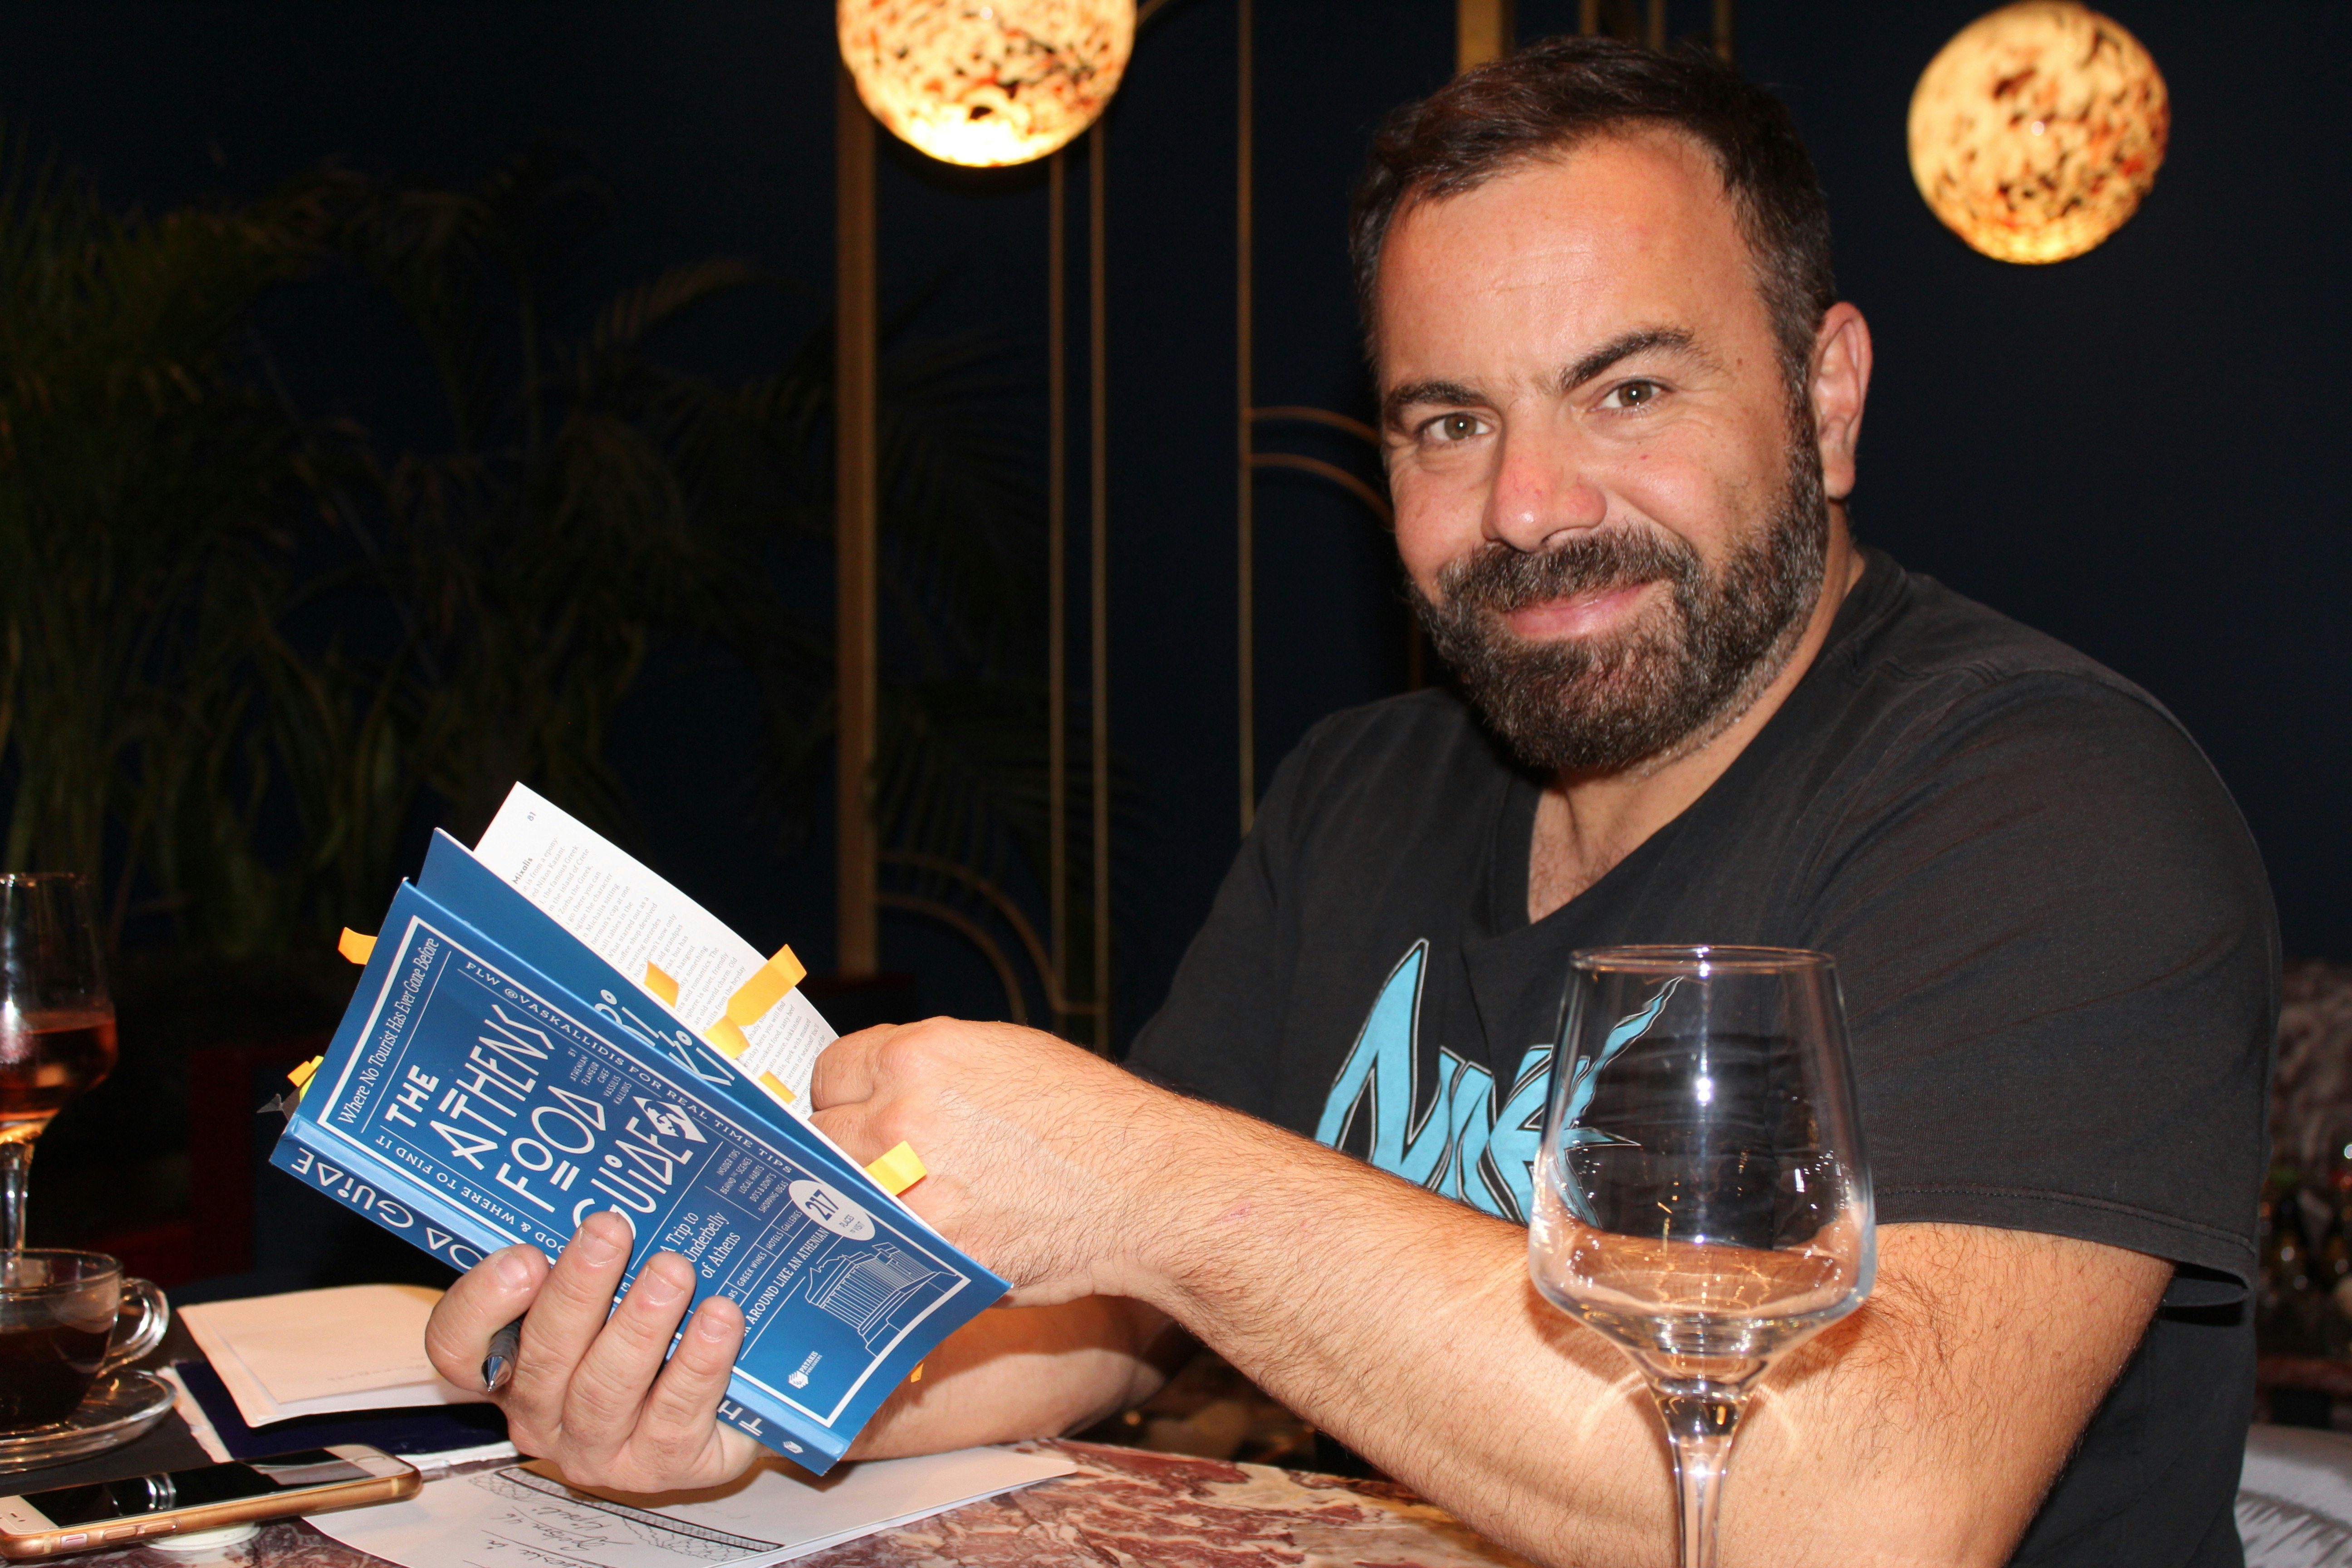 Vassilis Kallidis smiles confidently at the camera as he holds a copy of his new book, the Athens Food Guide under the warm lighting of blown glass lamps hanging from the ceiling of a restaurant. He wears a black t-shirt and a wine glass sits in front of him. He has a short beard and dark, short-cropped hair. 